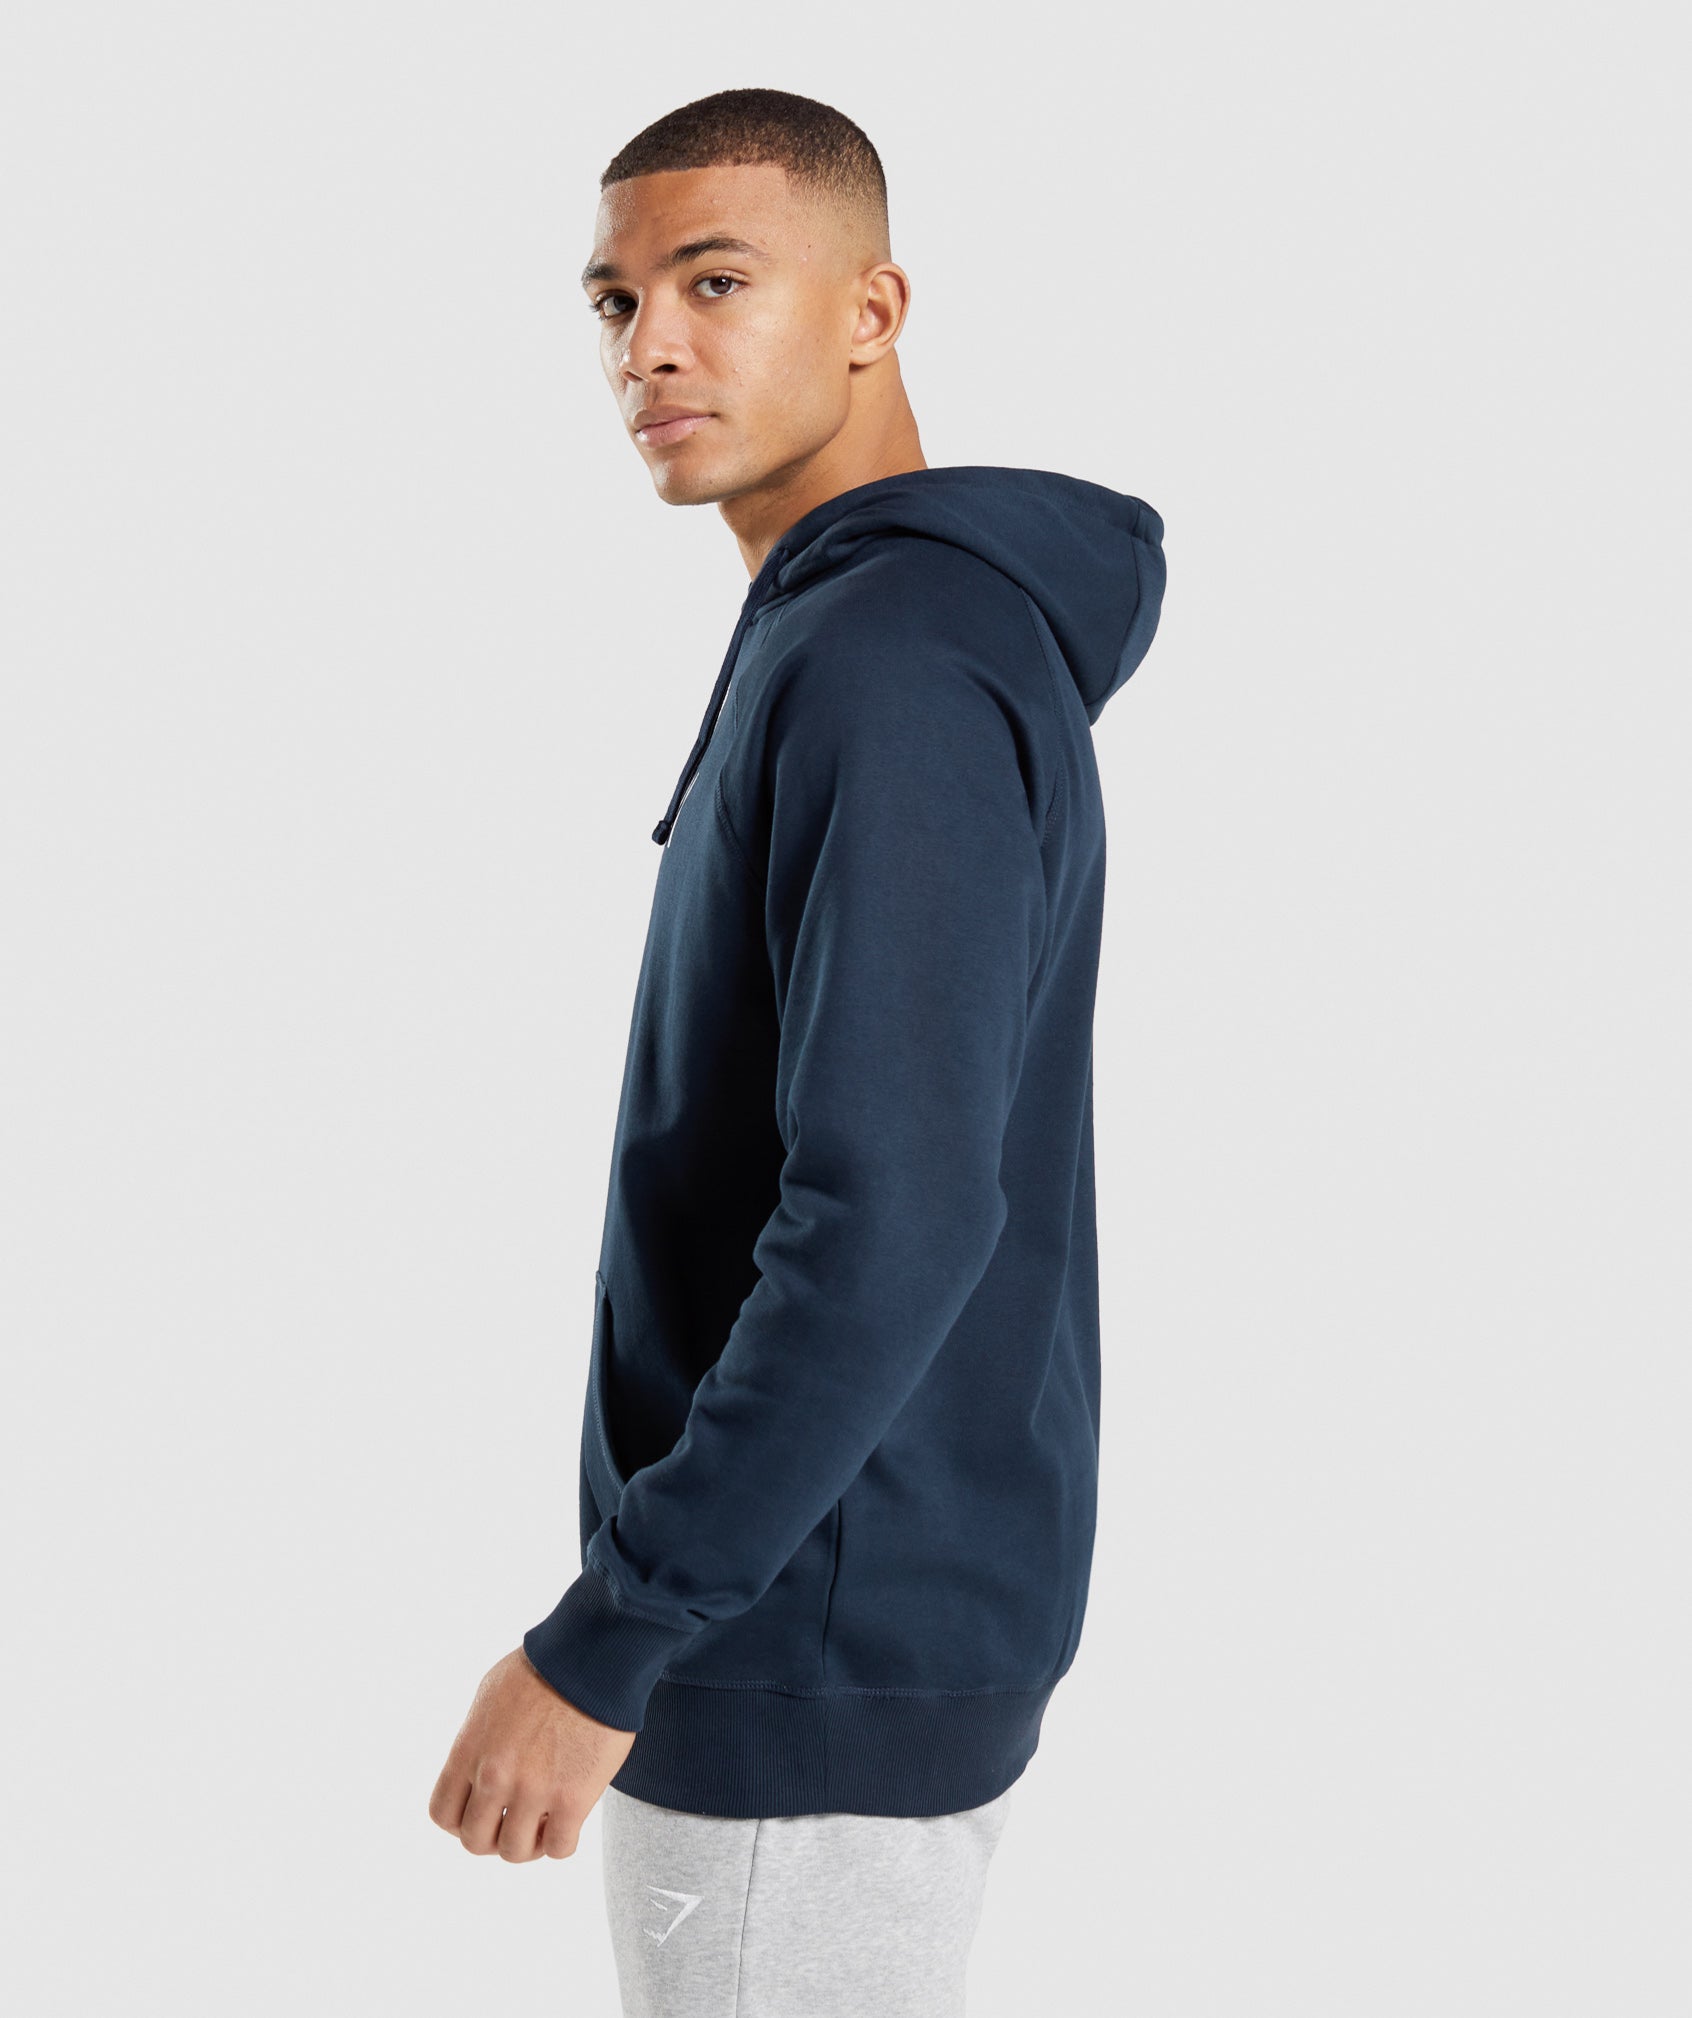 Apollo Hoodie in Navy - view 4